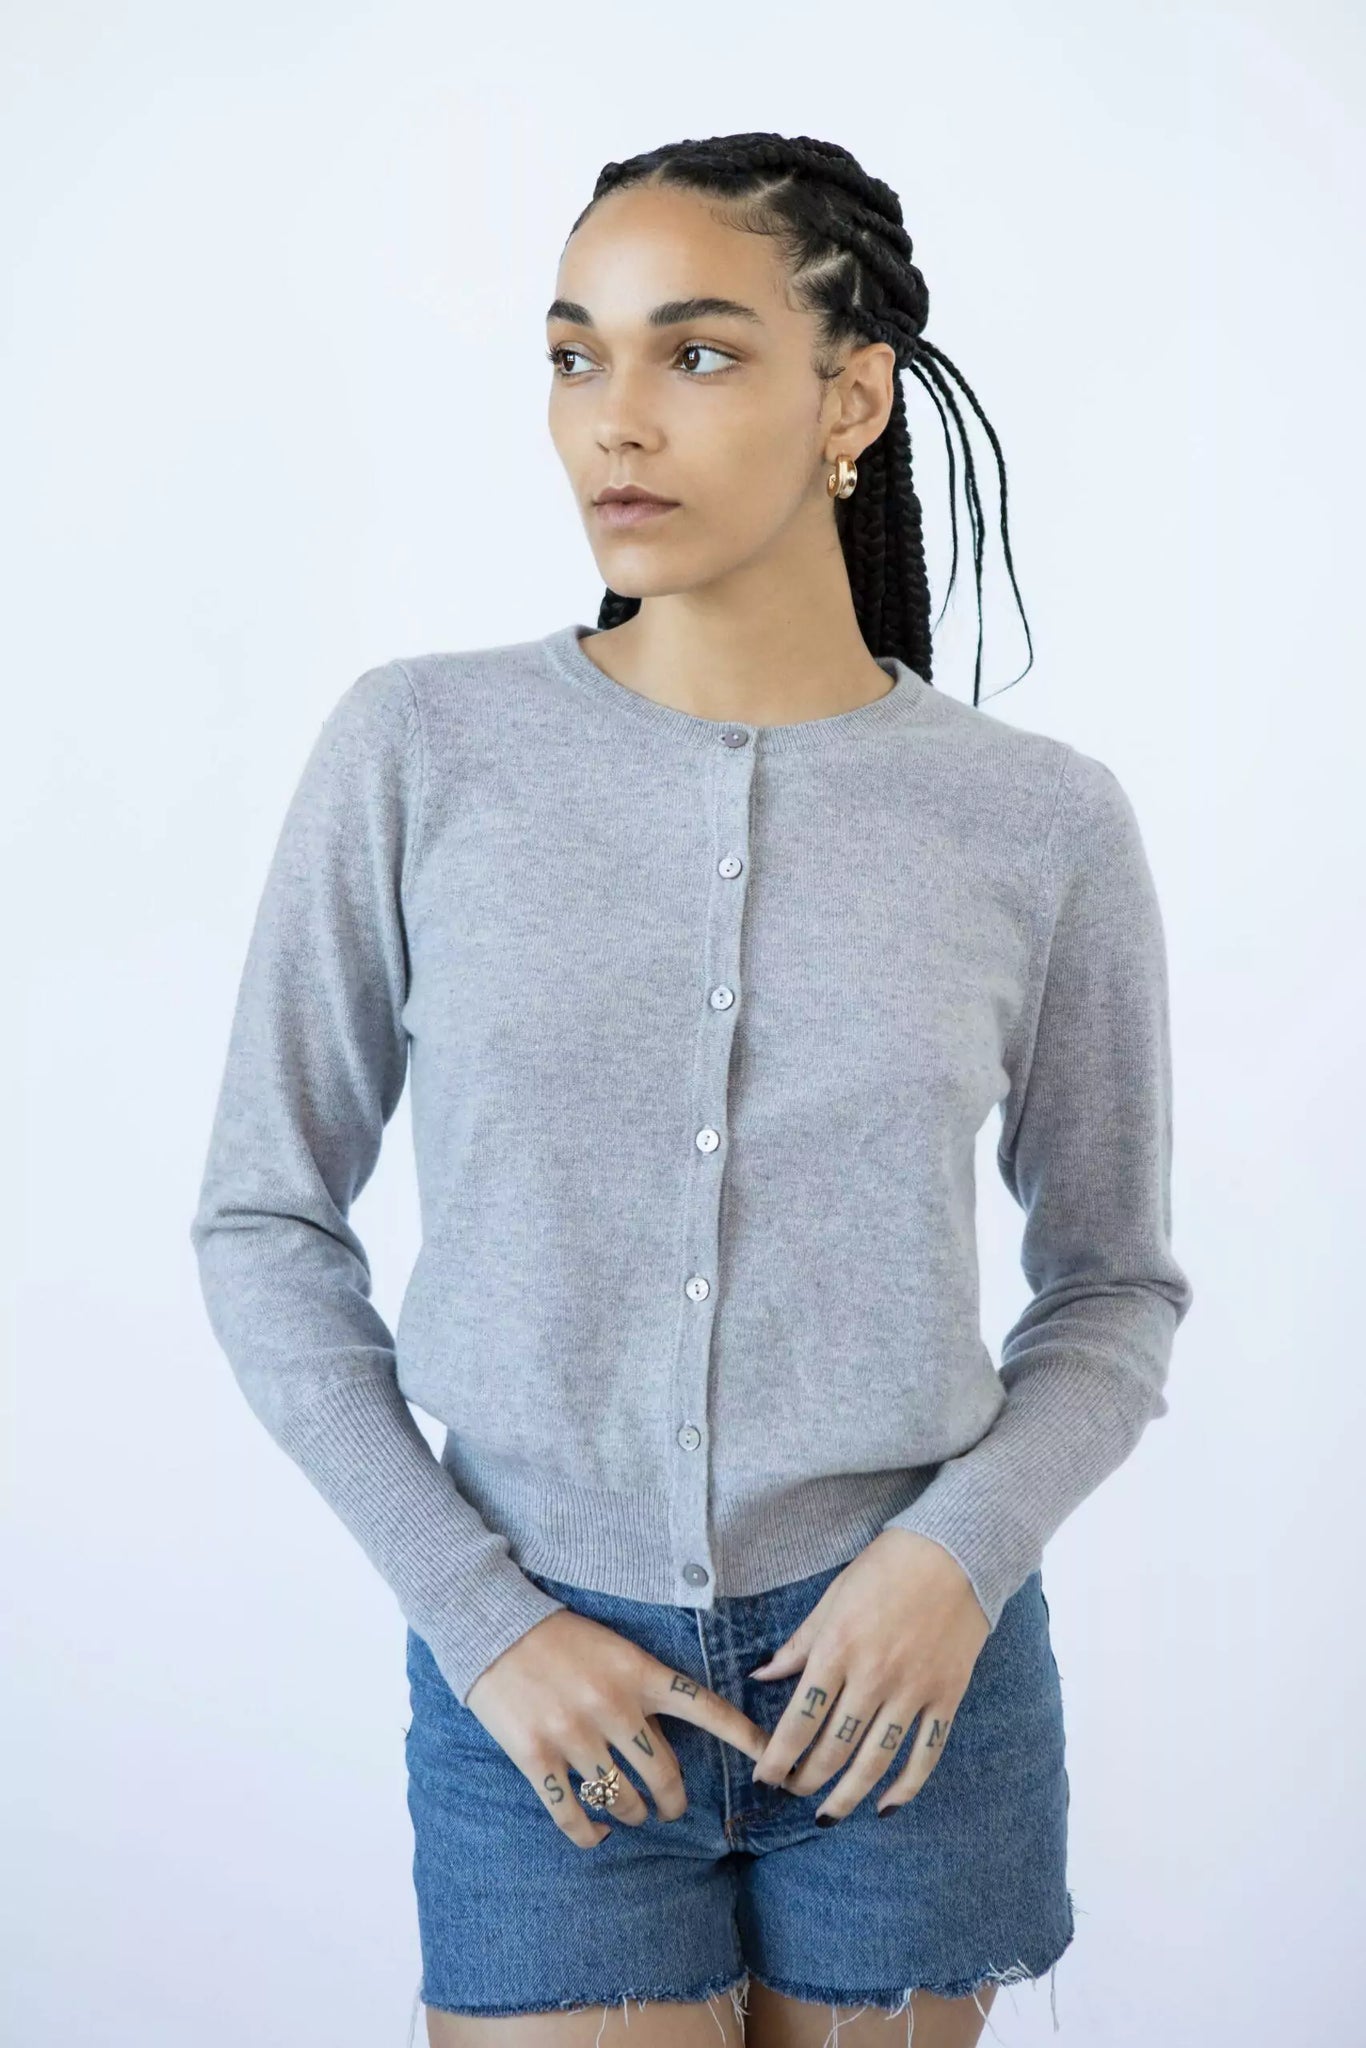 Photo of Model wearing Lyla Cashmere Cardigan featuring buttons up the front in the colour stormy (grey) available at UniKoncept in Waterloo